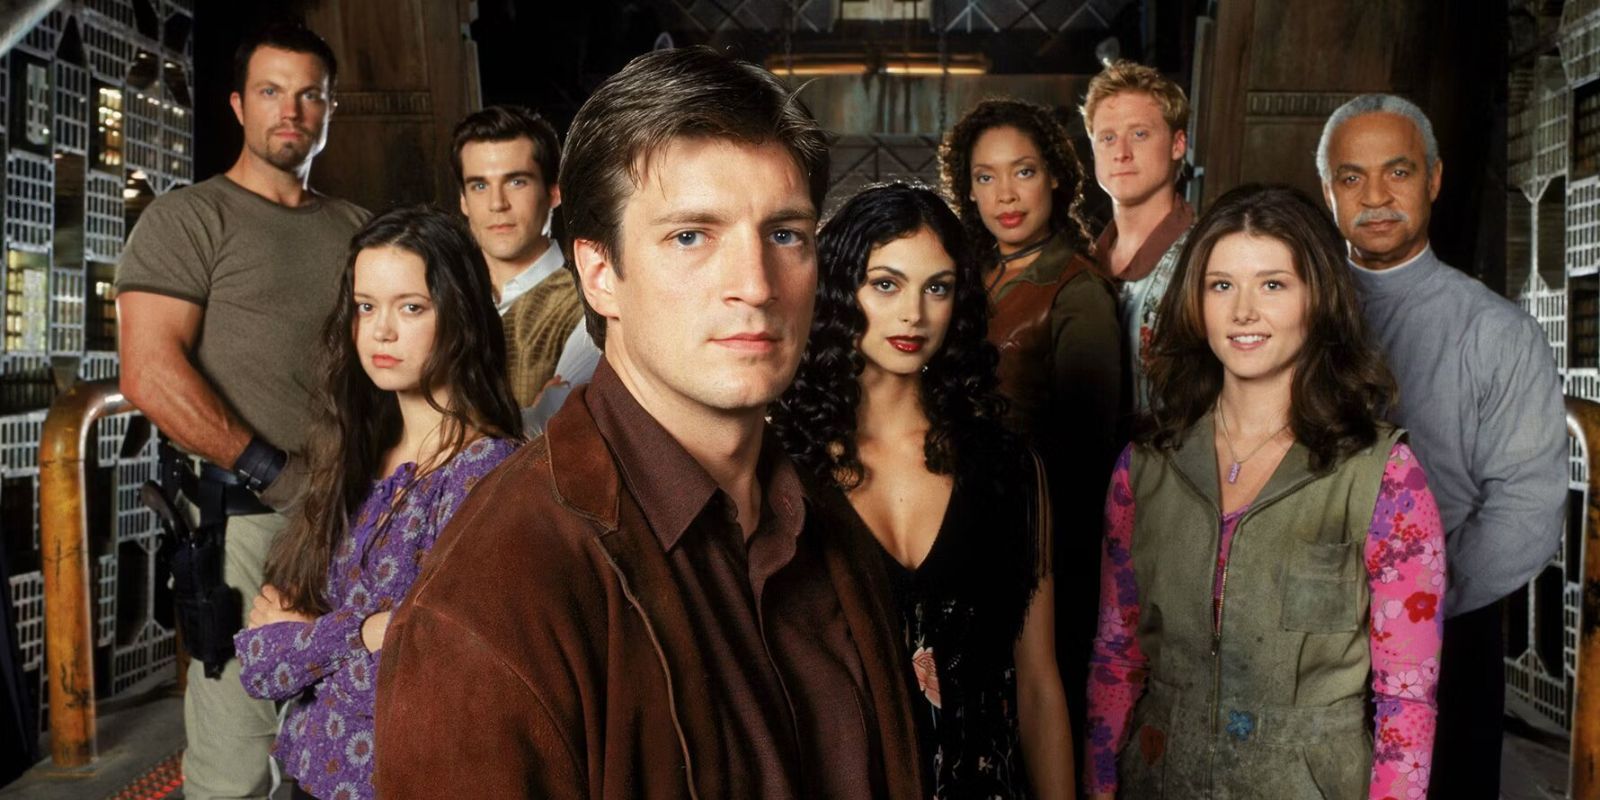 The cast of Firefly aboard Serenity